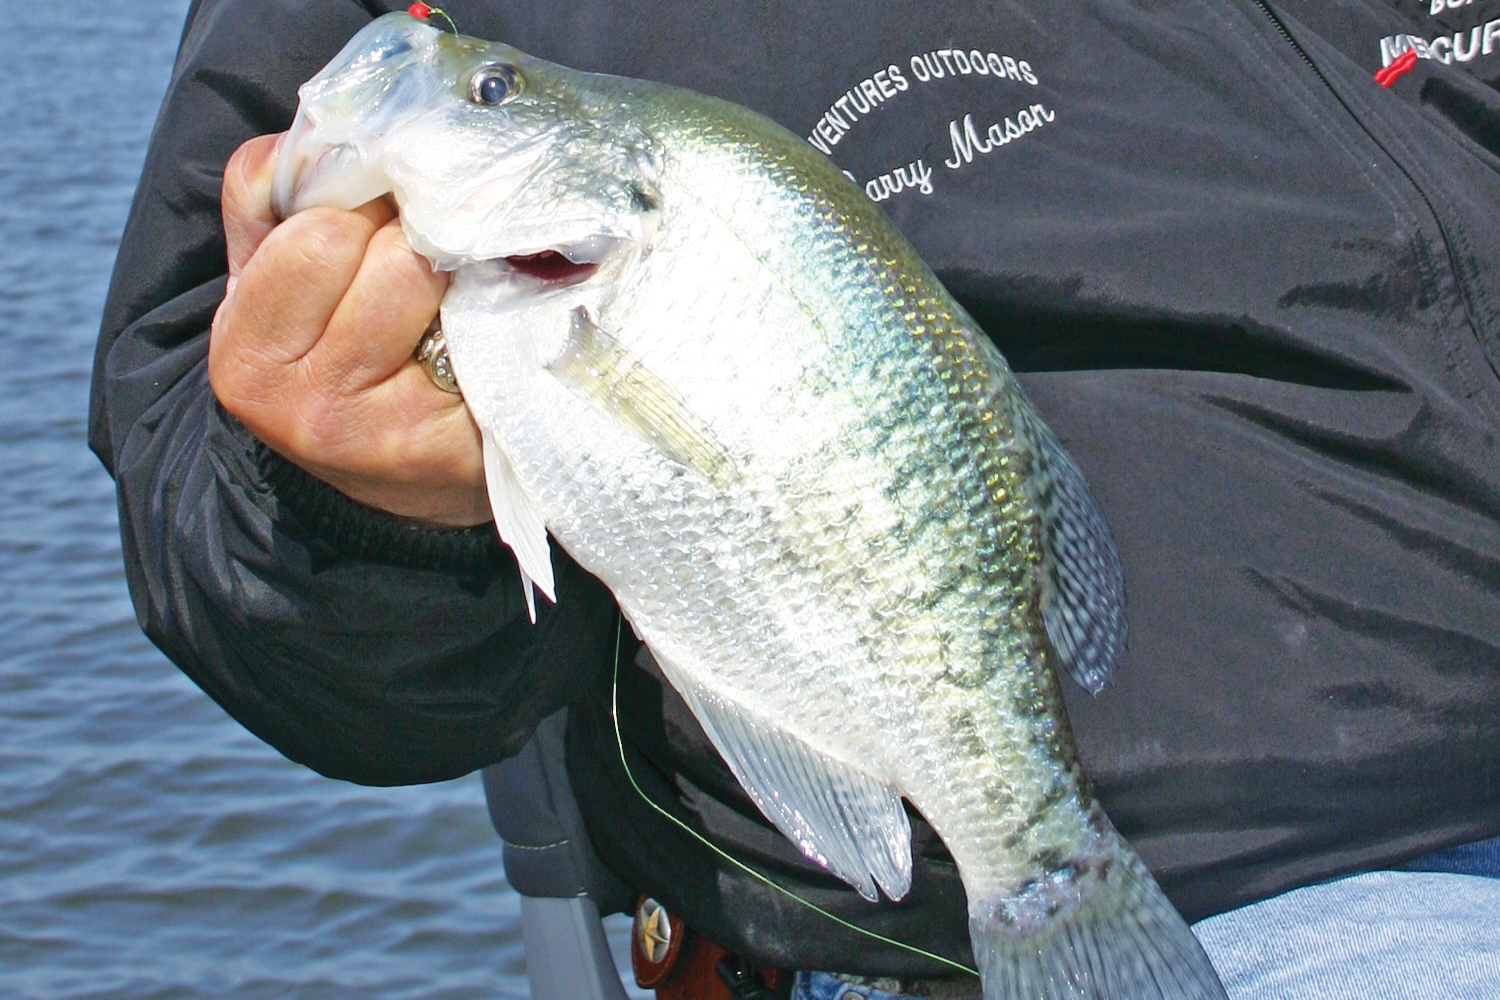 Slider Fishing for Crappies: an Old and Proven Method - MidWest Outdoors